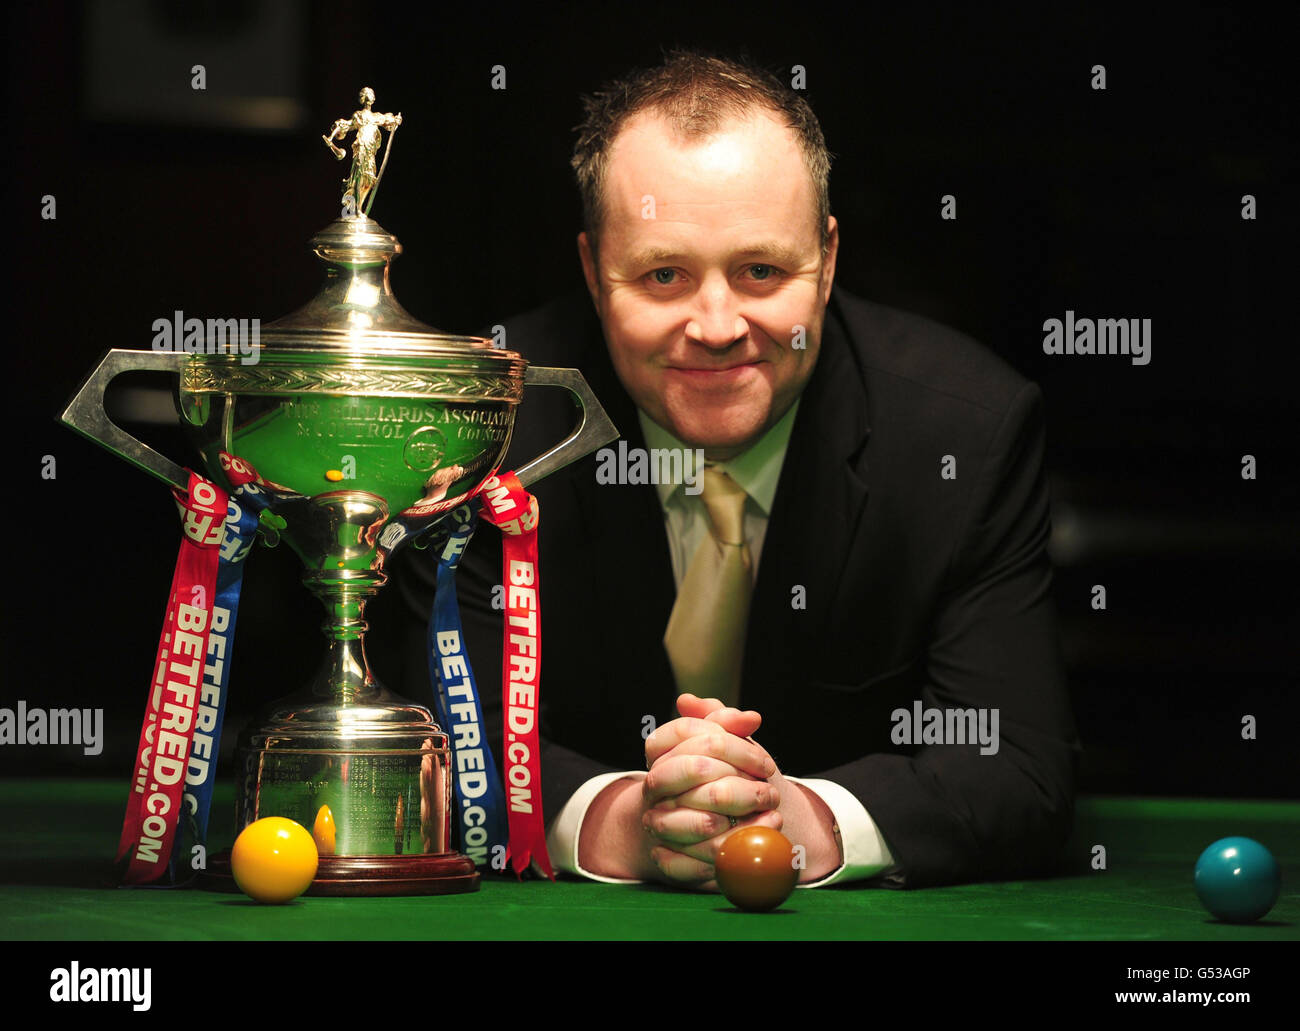 World Snooker Champion High Resolution Stock Photography and Images - Alamy